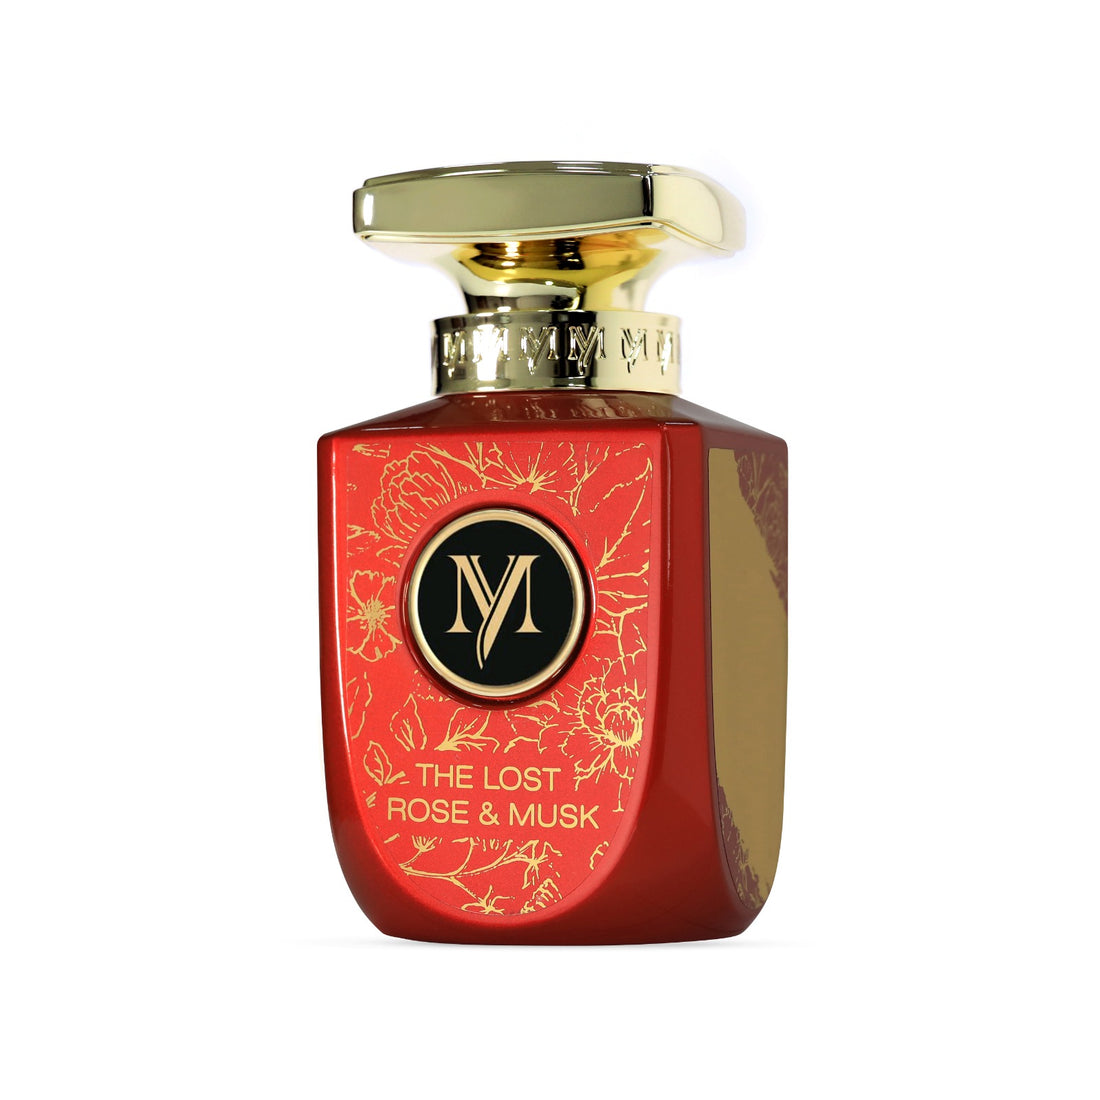 The Lost Rose & Musk – www.myperfumesselect.com